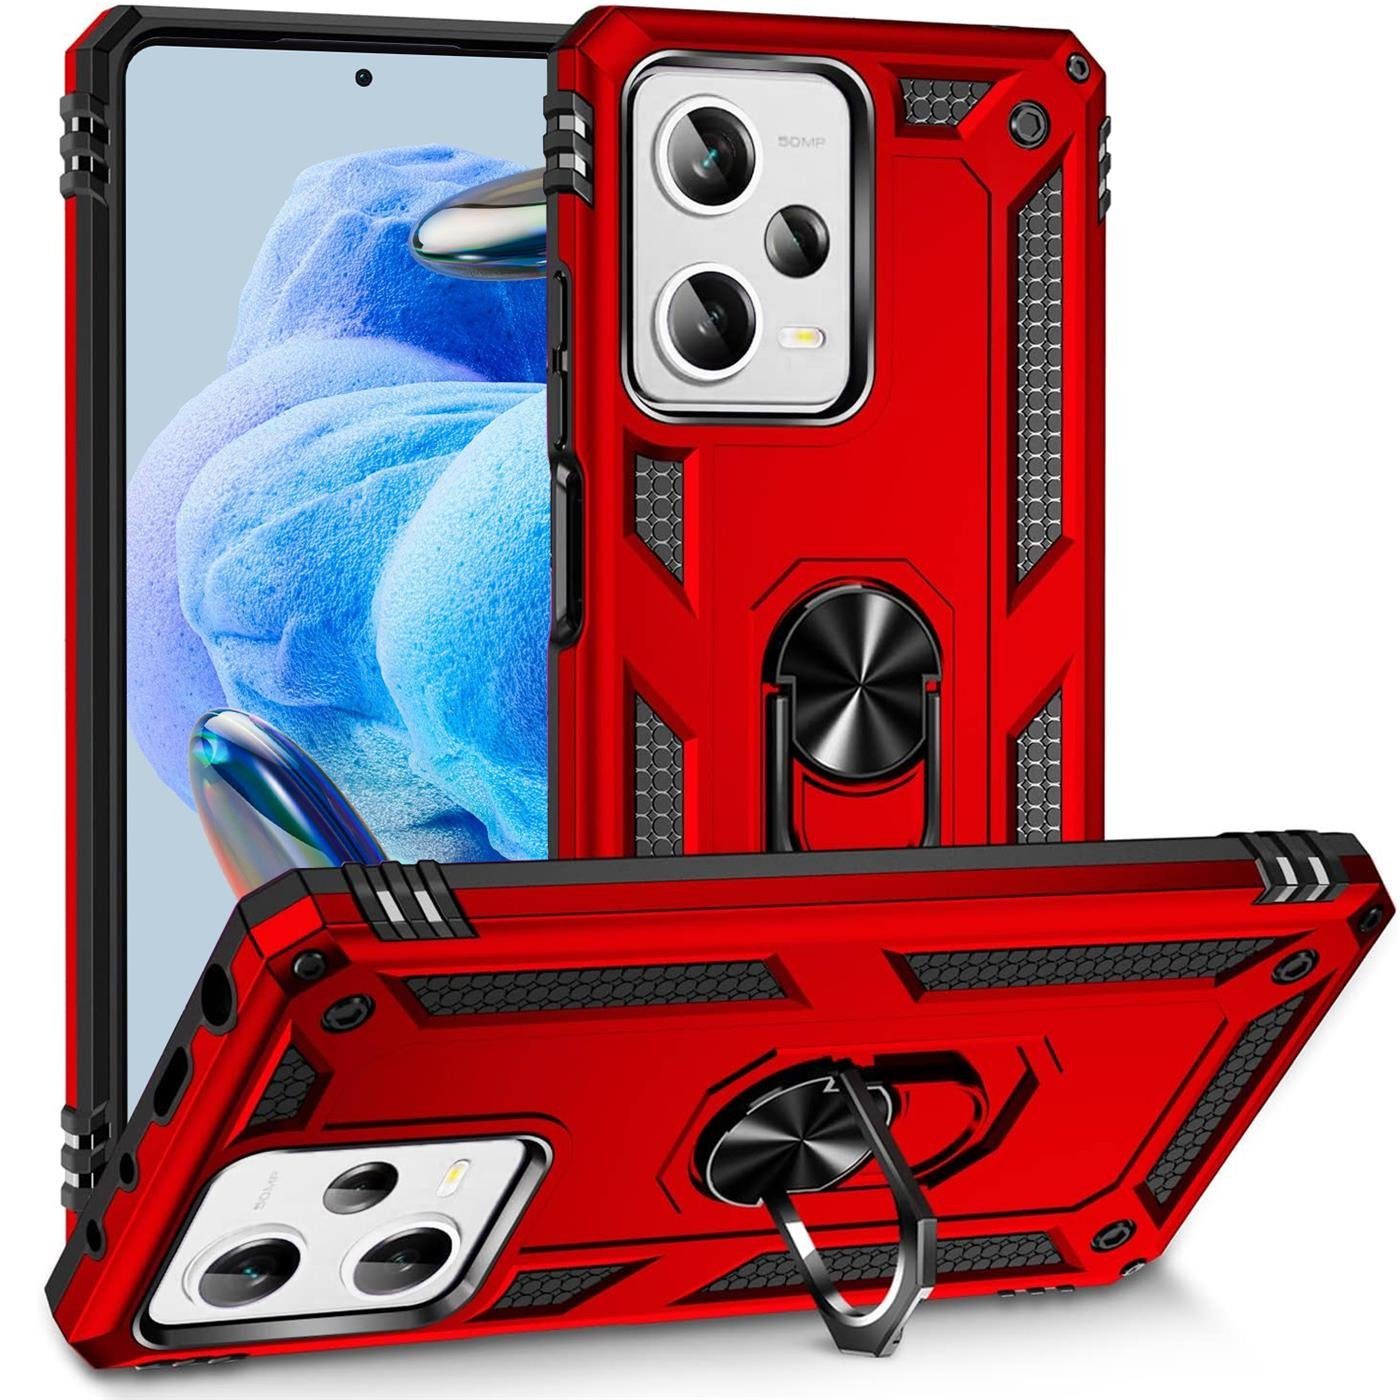 CoolGadget Handyhülle Armor Shield Case für Apple iPhone 11 Pro Max 6,5  Zoll, Outdoor Cover Magnet Ringhalterung Handy Hülle für iPhone 11 Pro Max